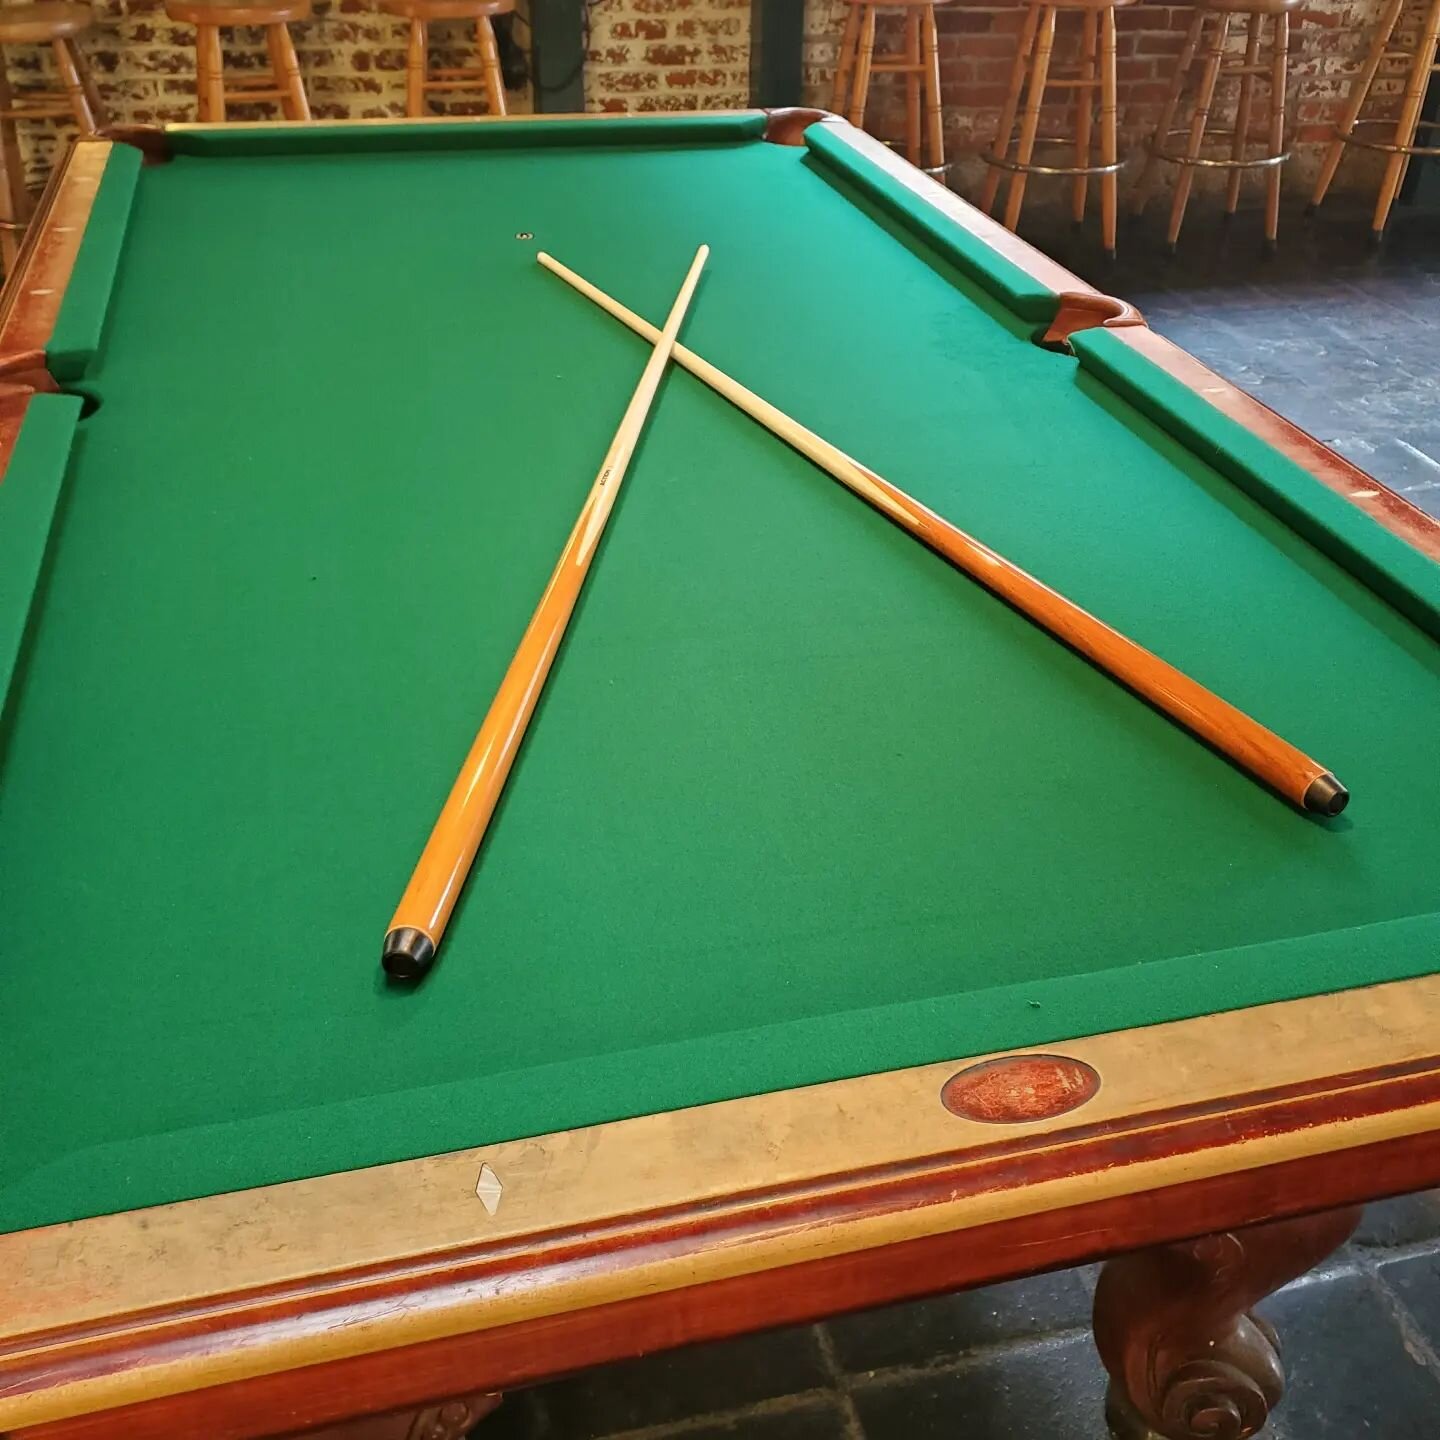 Can you do this on Dargan's Pool Tables. Click on link.

https://youtu.be/n2-TtAOy2pg

#santabarbaradining #santabarbarapub #santabarbarafoods #santabarbarabusiness #pooltables  #playpool